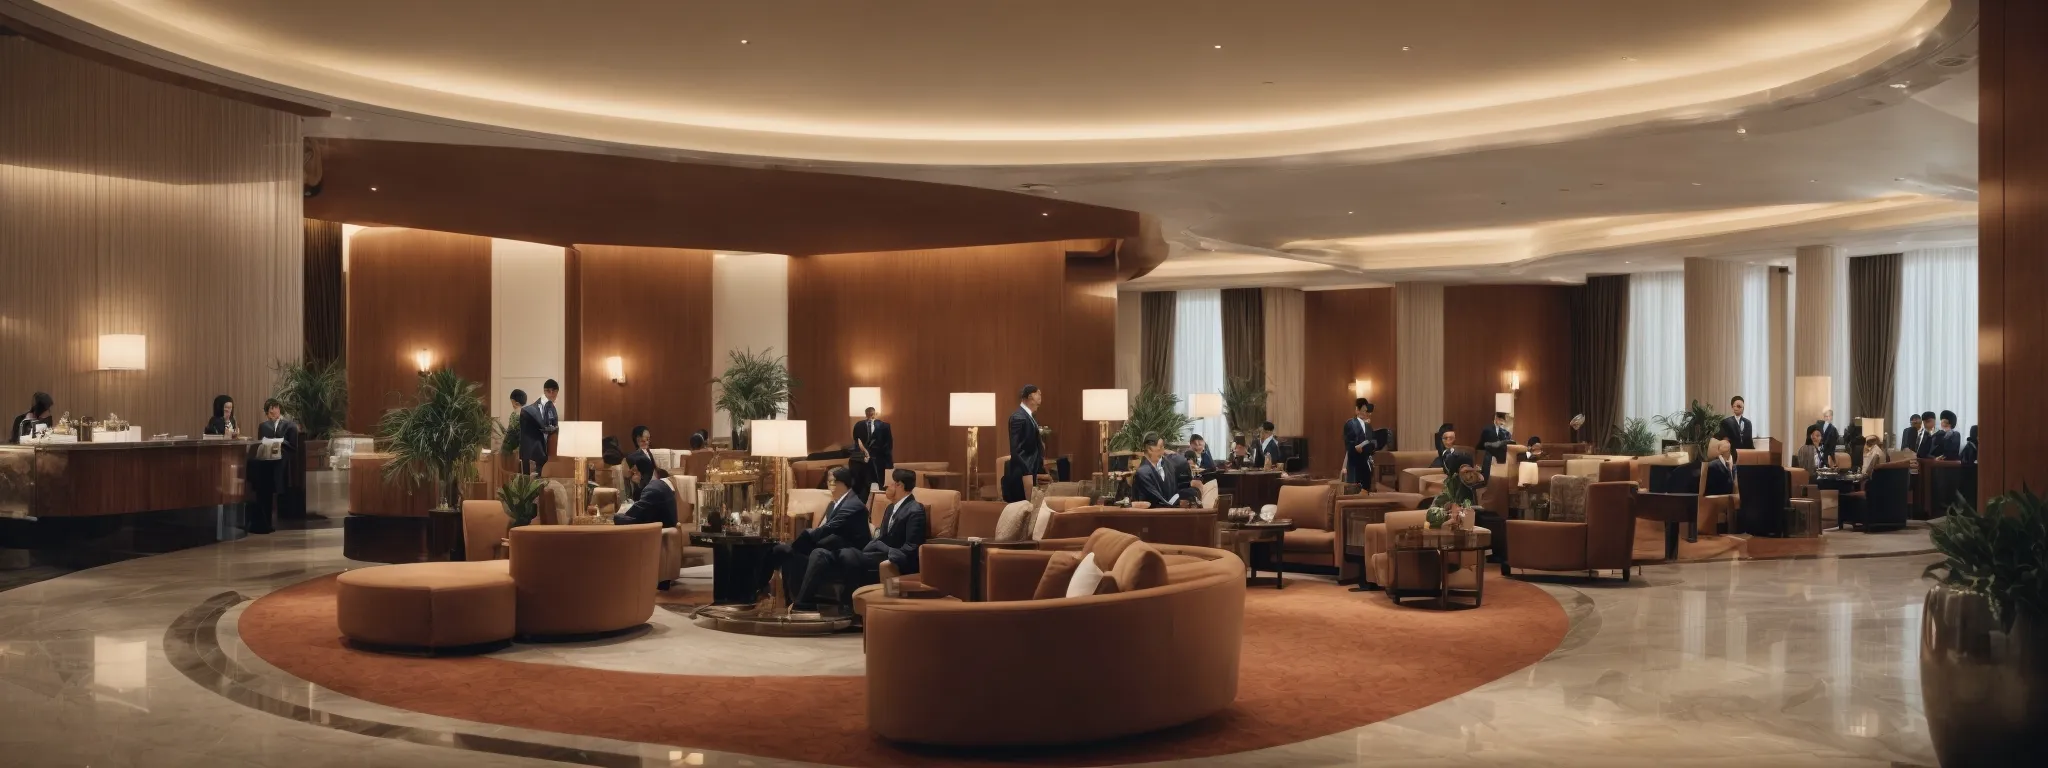 a panoramic view of a luxurious hotel lobby bustling with guests, emphasizing the prestige and relevance of the hospitality venue in the digital landscape.